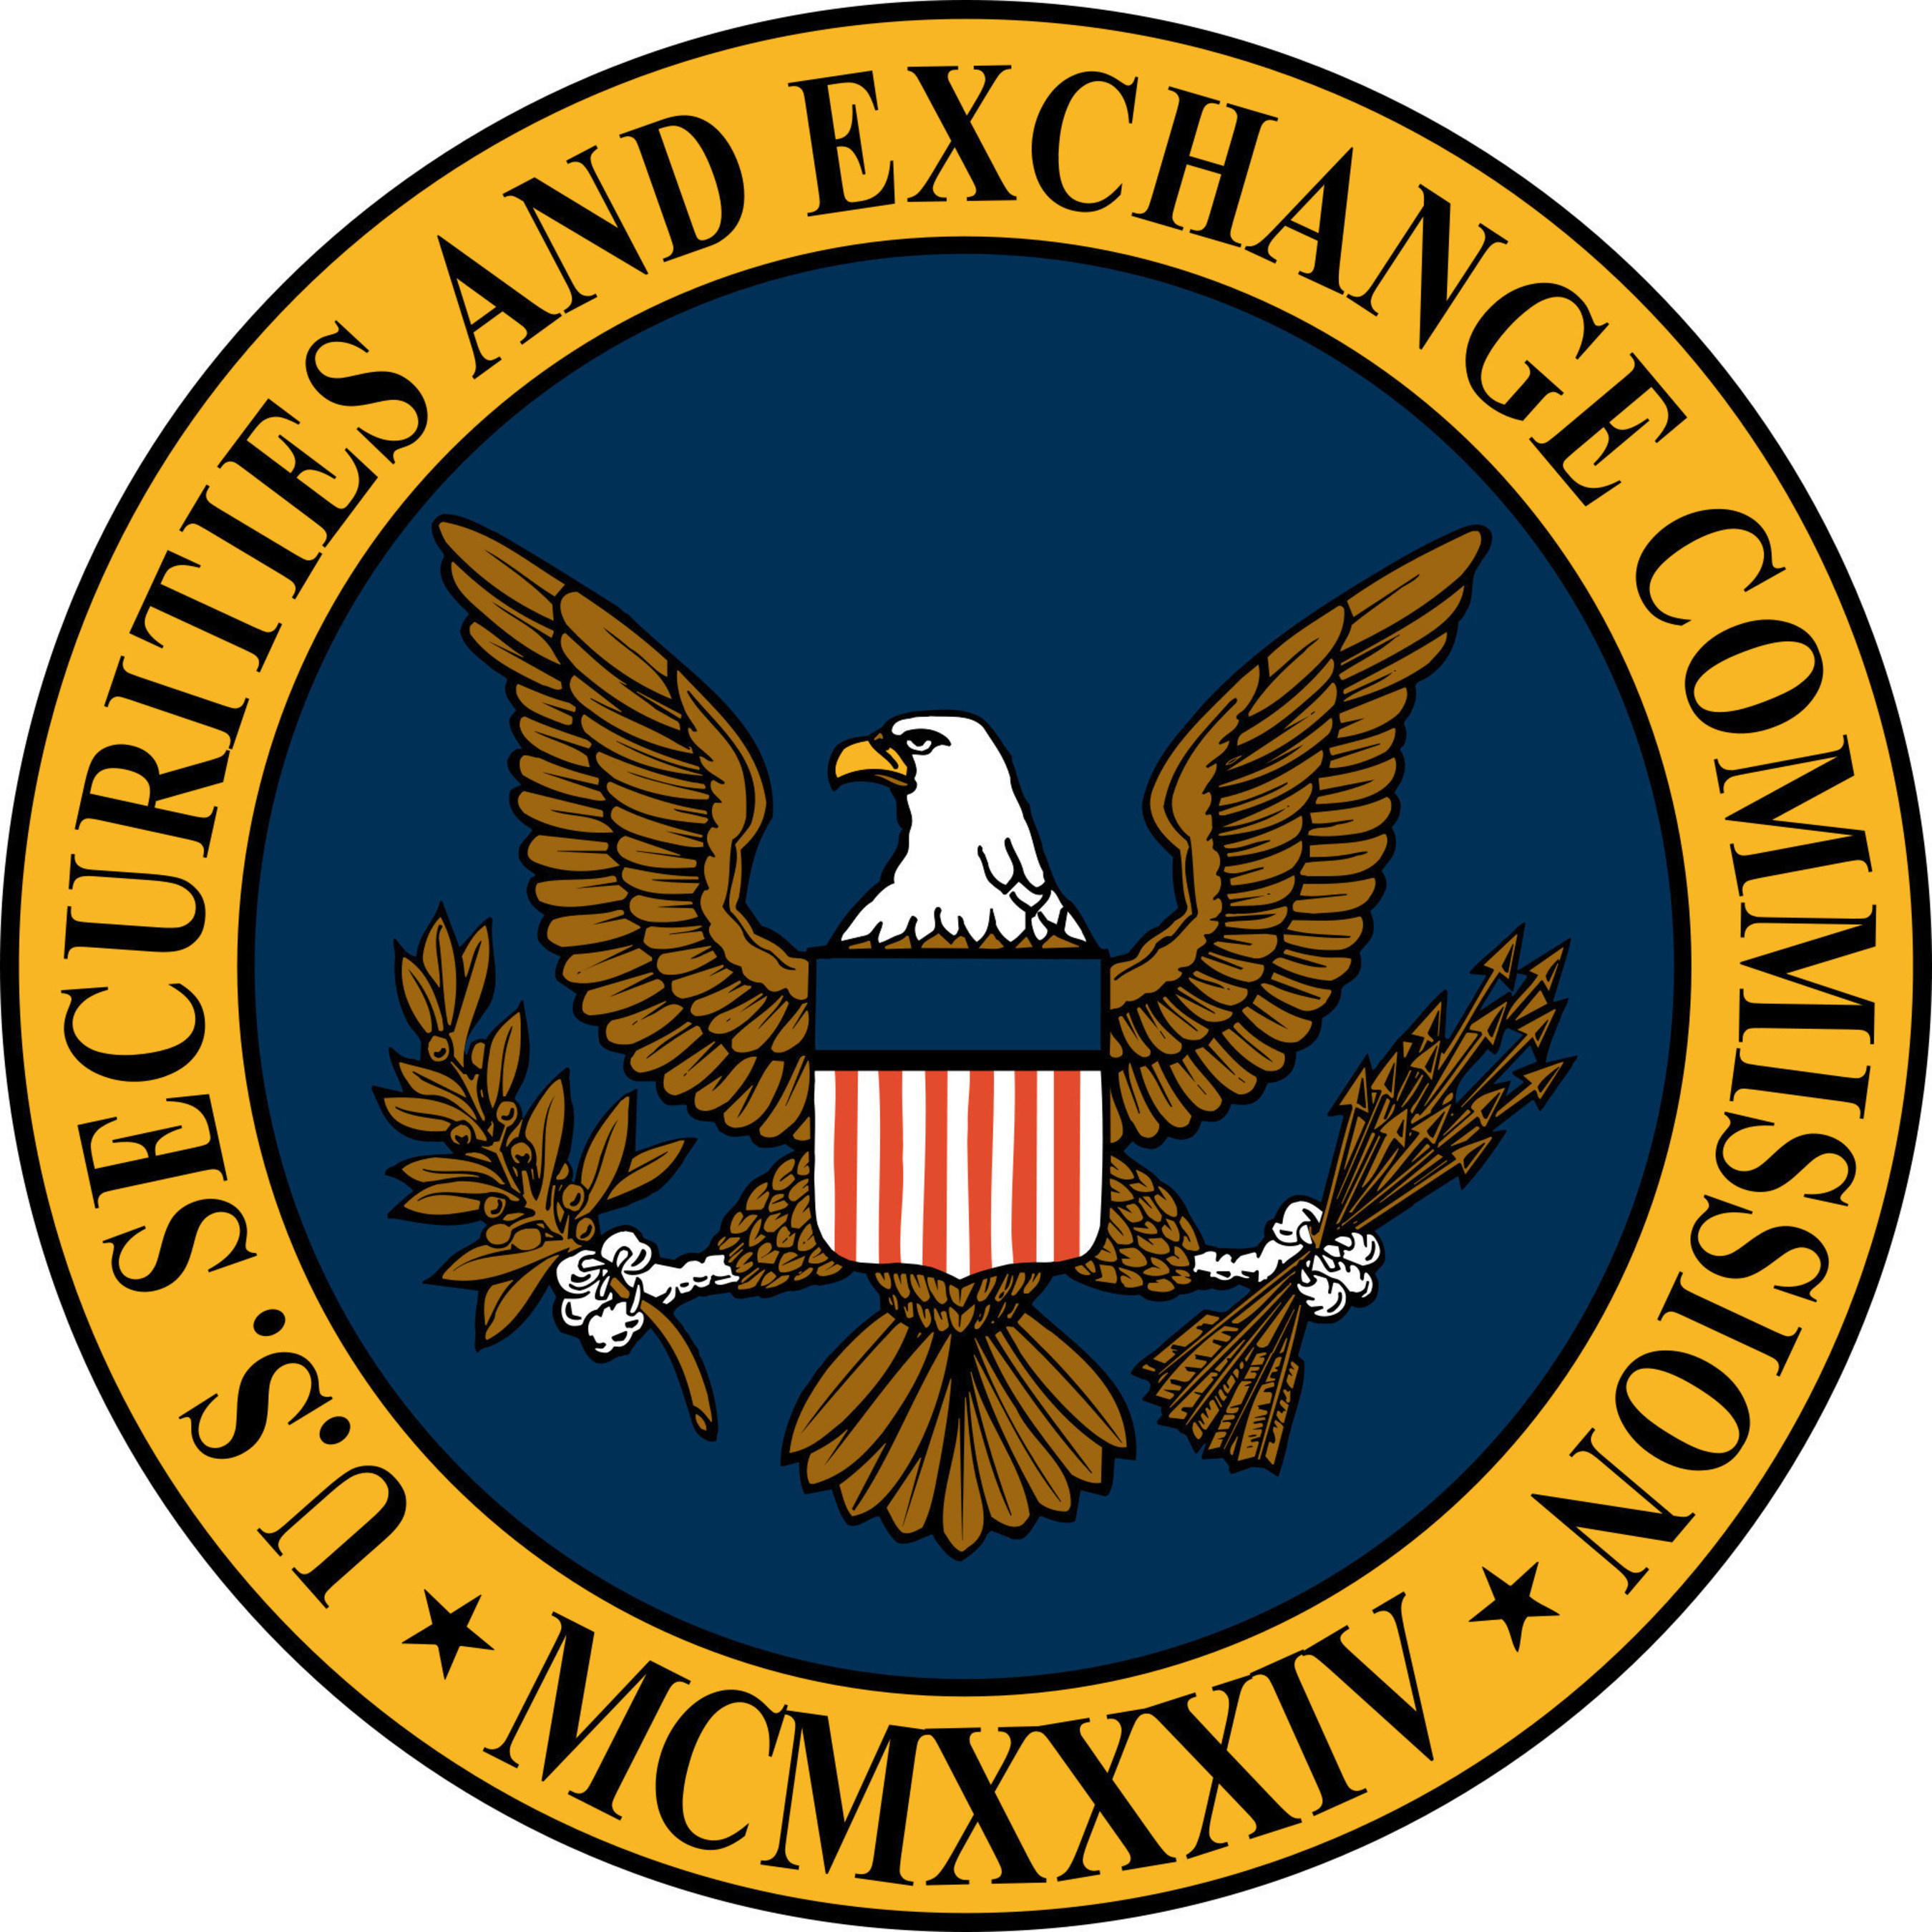 U.S. Securities and Exchange Commission (PRNewsFoto/RCB Fund Services LLC)